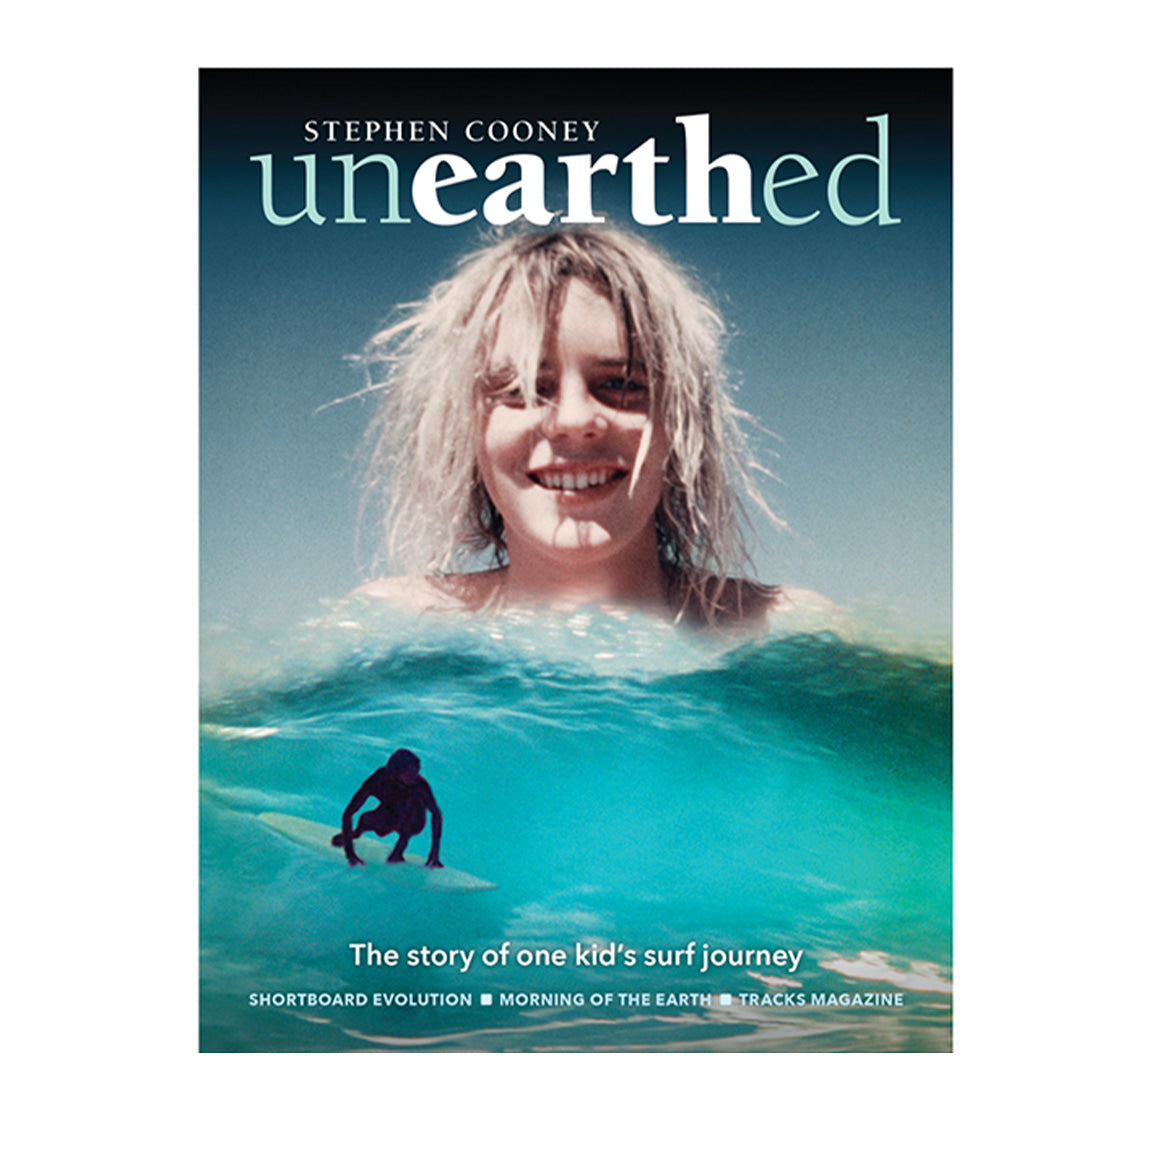 UNEARTHED BOOK - STEPHEN COONEY